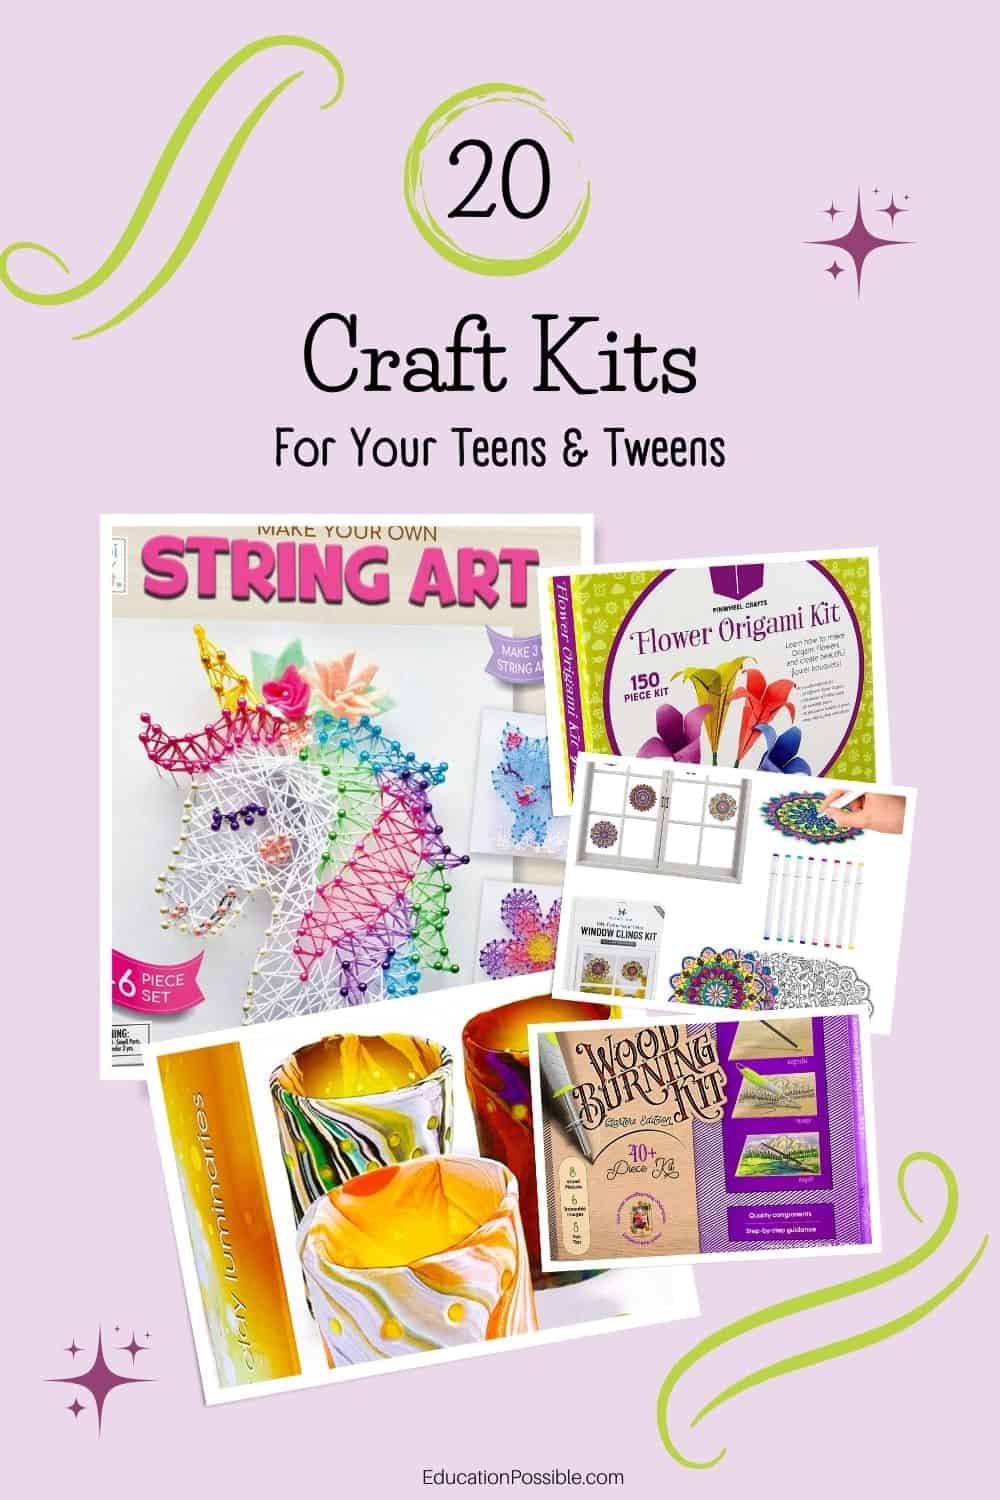 https://educationpossible.com/wp-content/uploads/2022/12/Craft-Kits-for-Teens.jpg